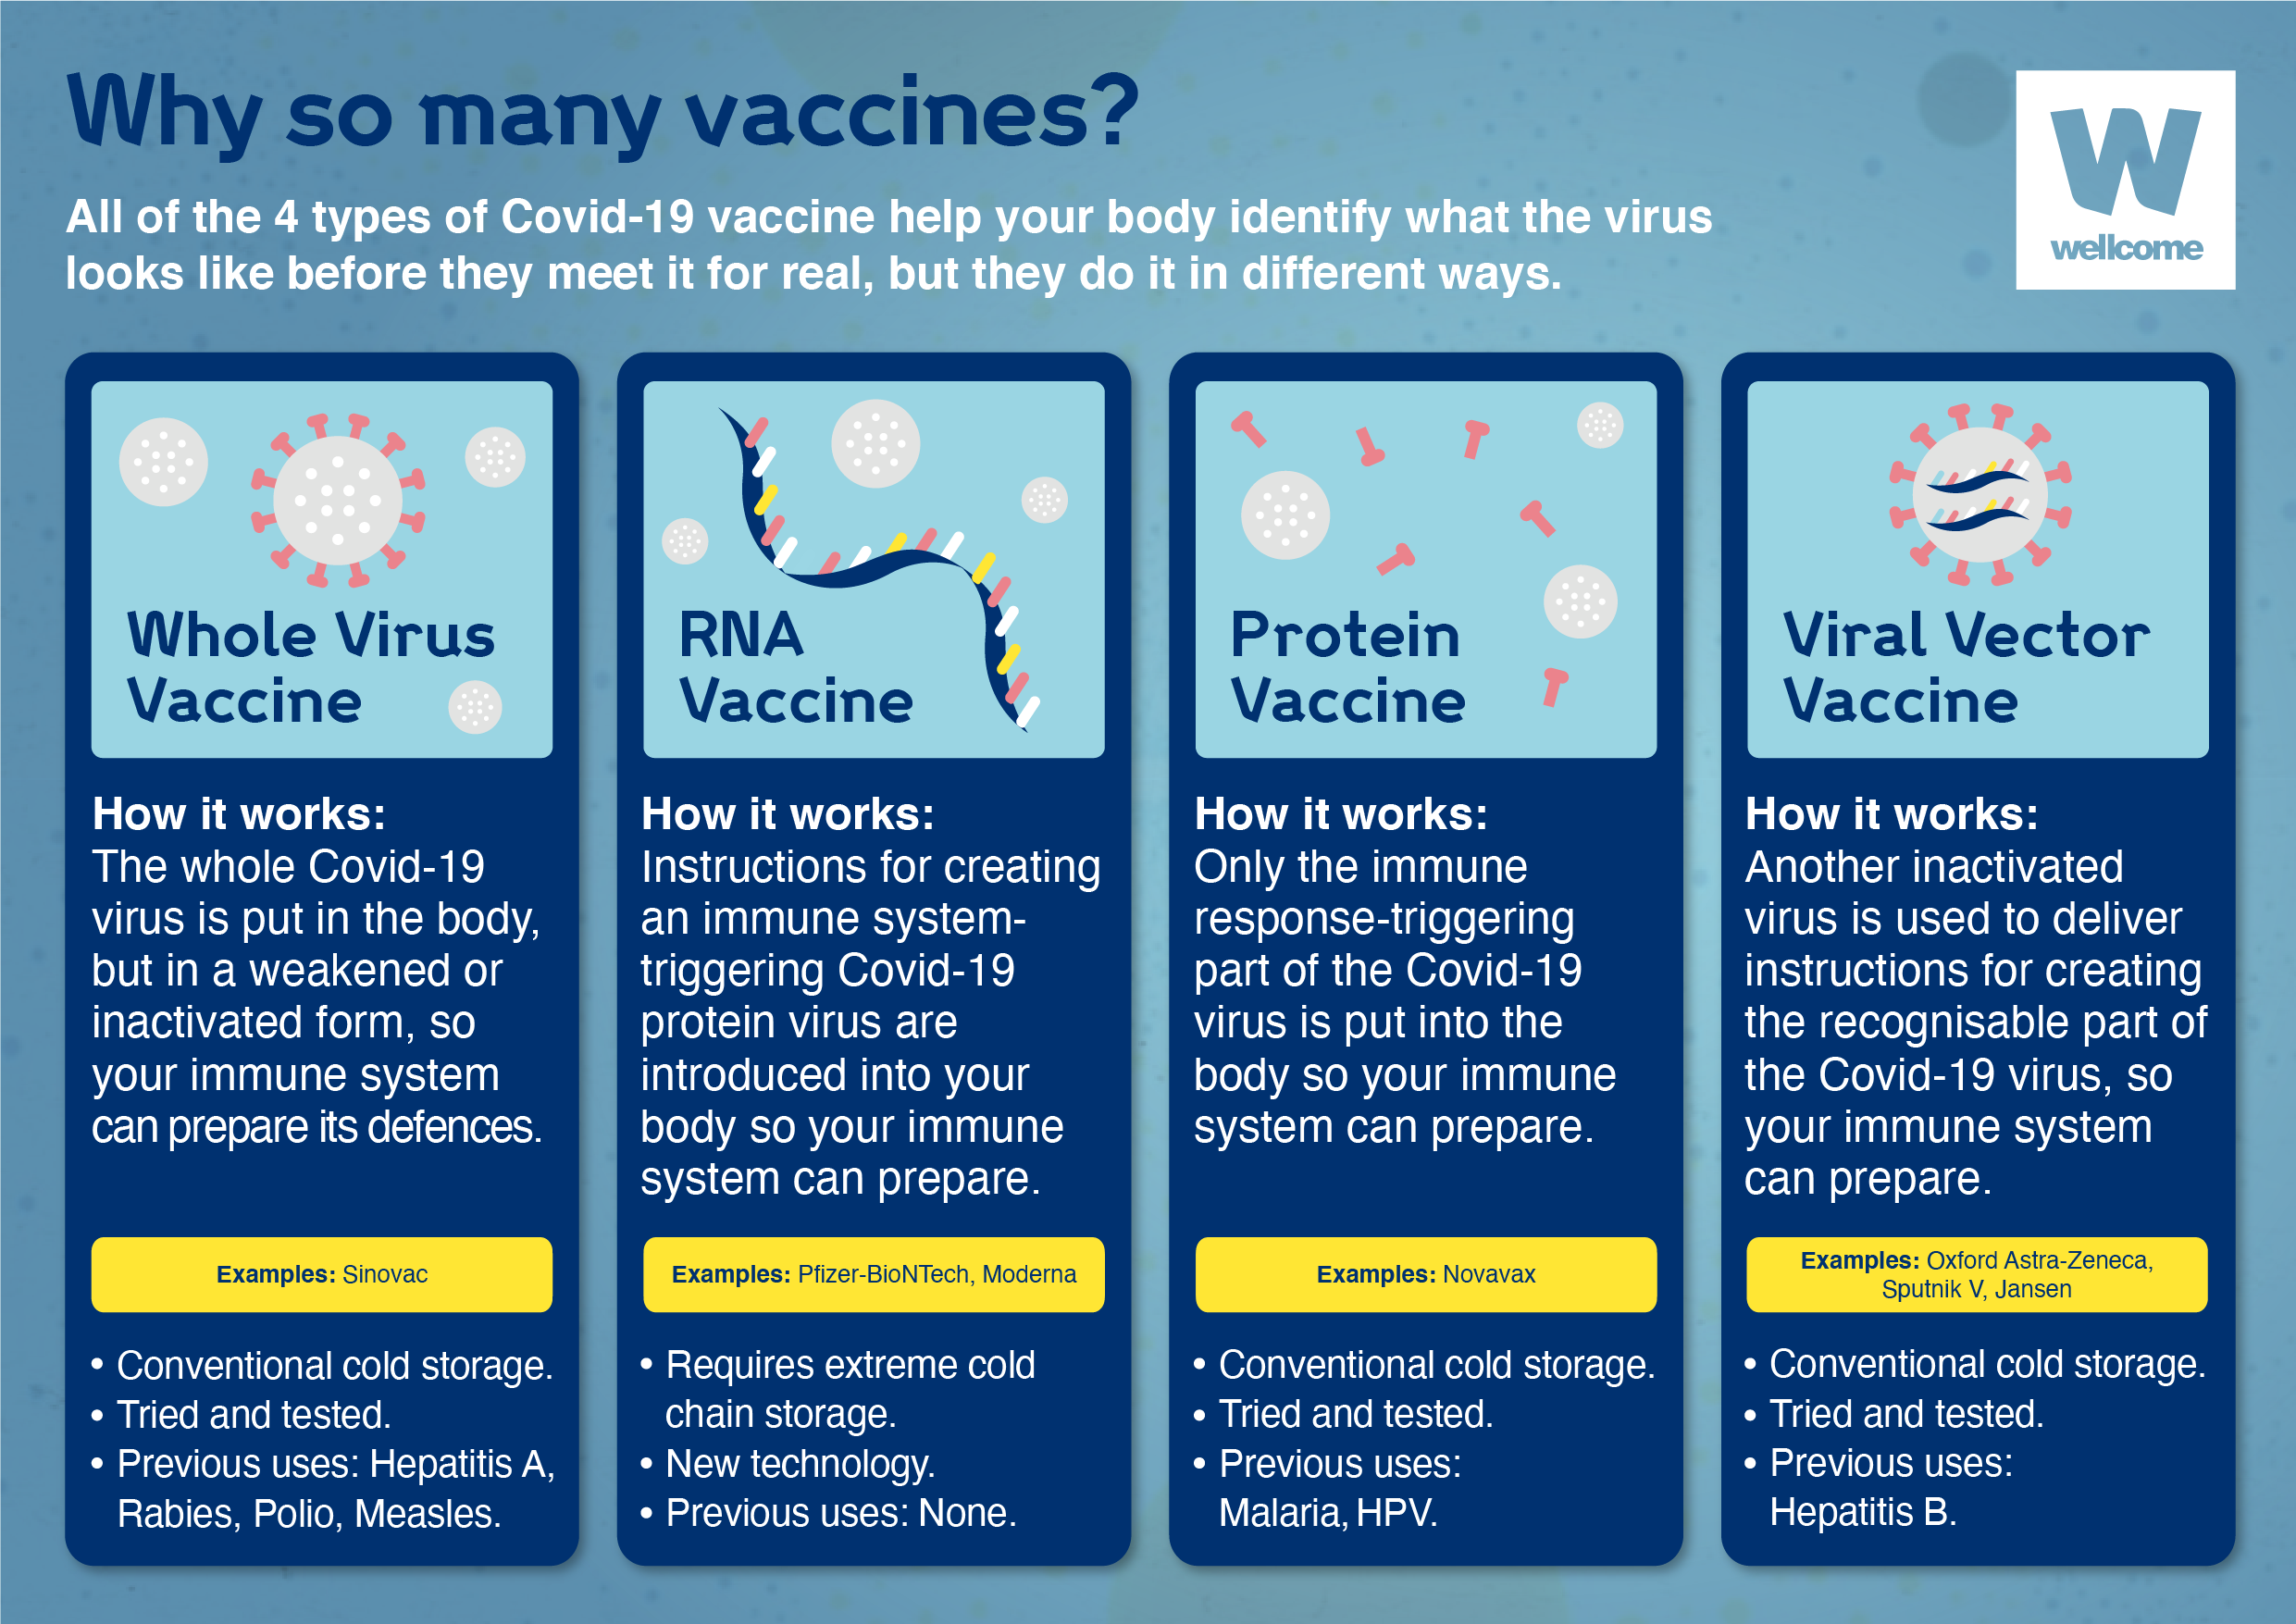 All four times of Covid-19 vaccine - whole virus vaccine, RNA vaccine, Protein vaccine and viral vector vaccine - help your body identify virus looks like before they meet it for real, but they do it in different ways. 